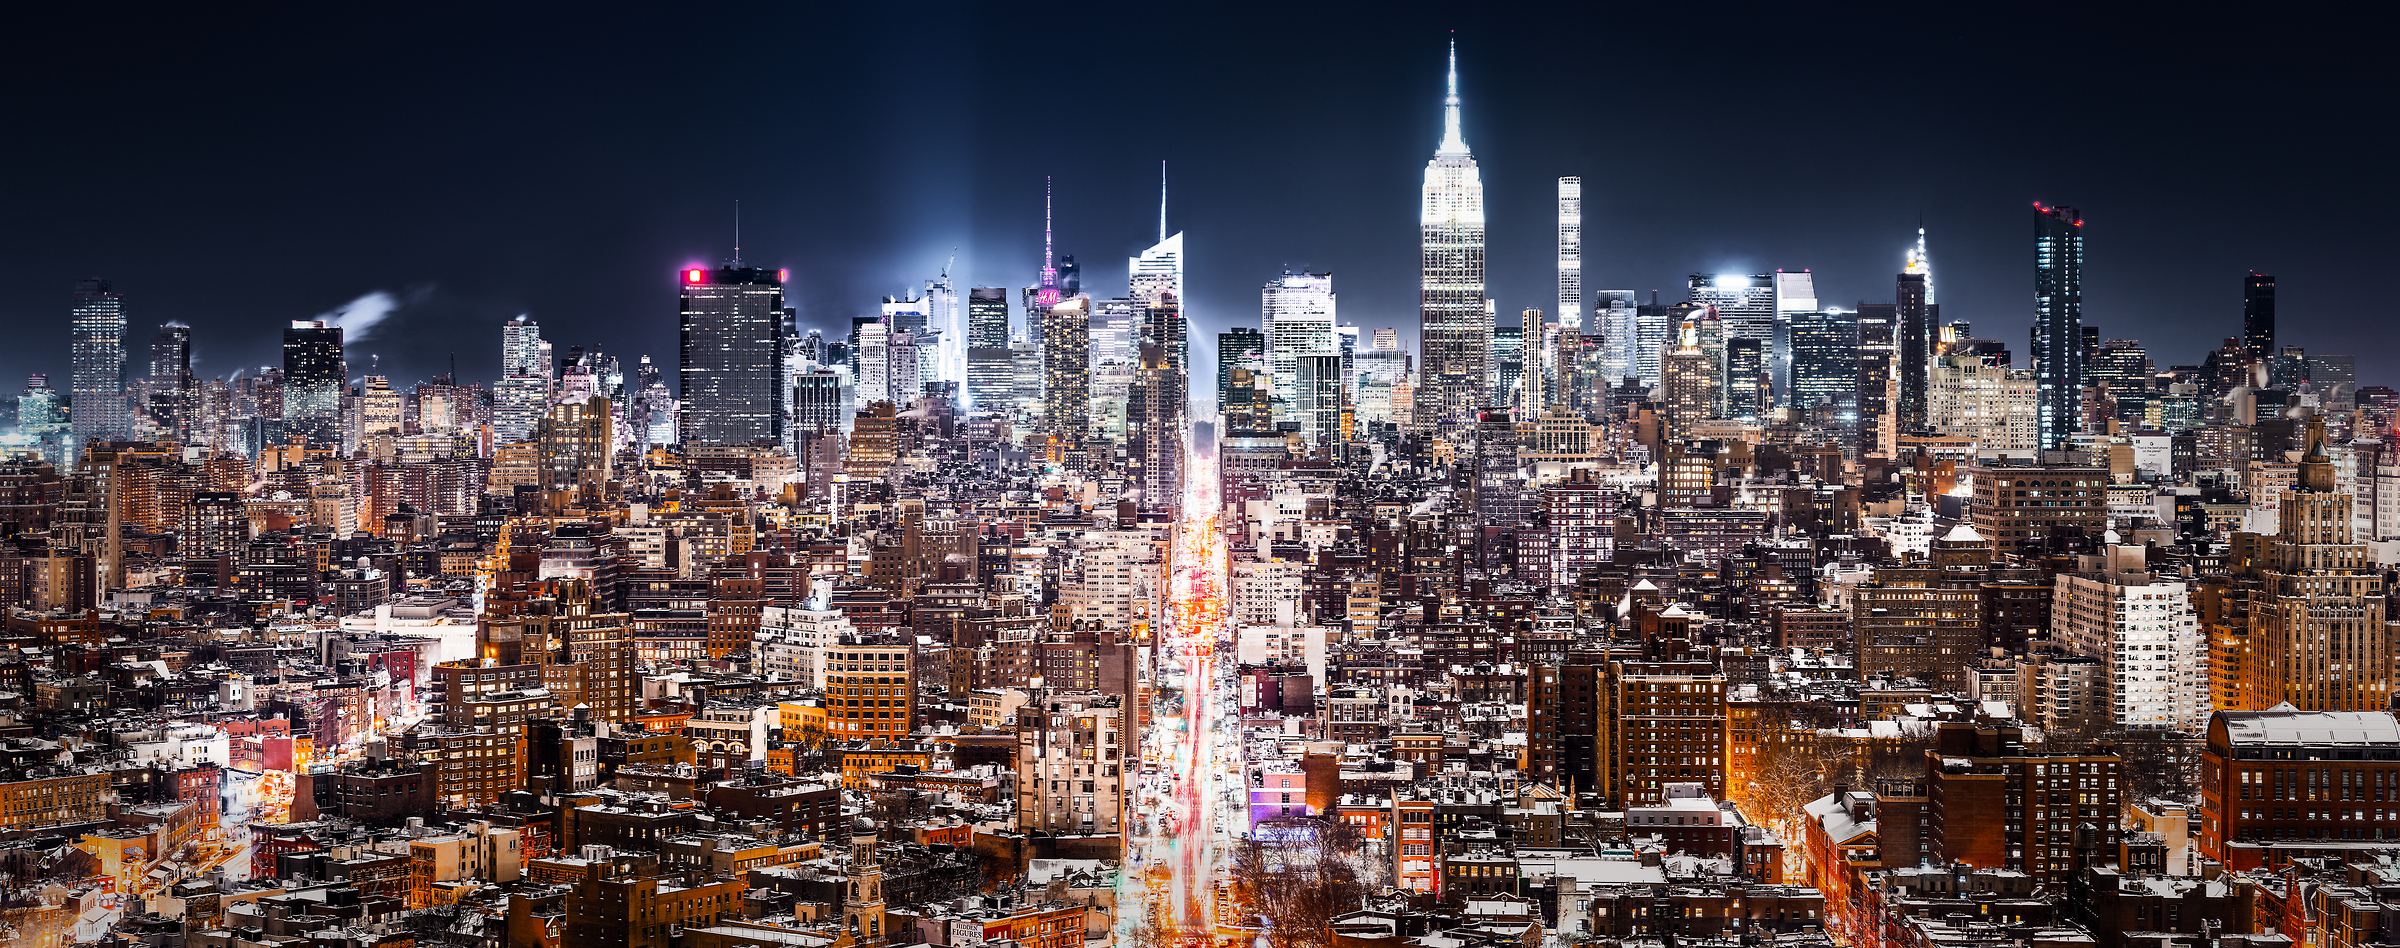 2,002 megapixels! A very high resolution, large-format VAST photo print of New York City at night; cityscape fine art photo created by Dan Piech in Midtown Manhattan, New York City.